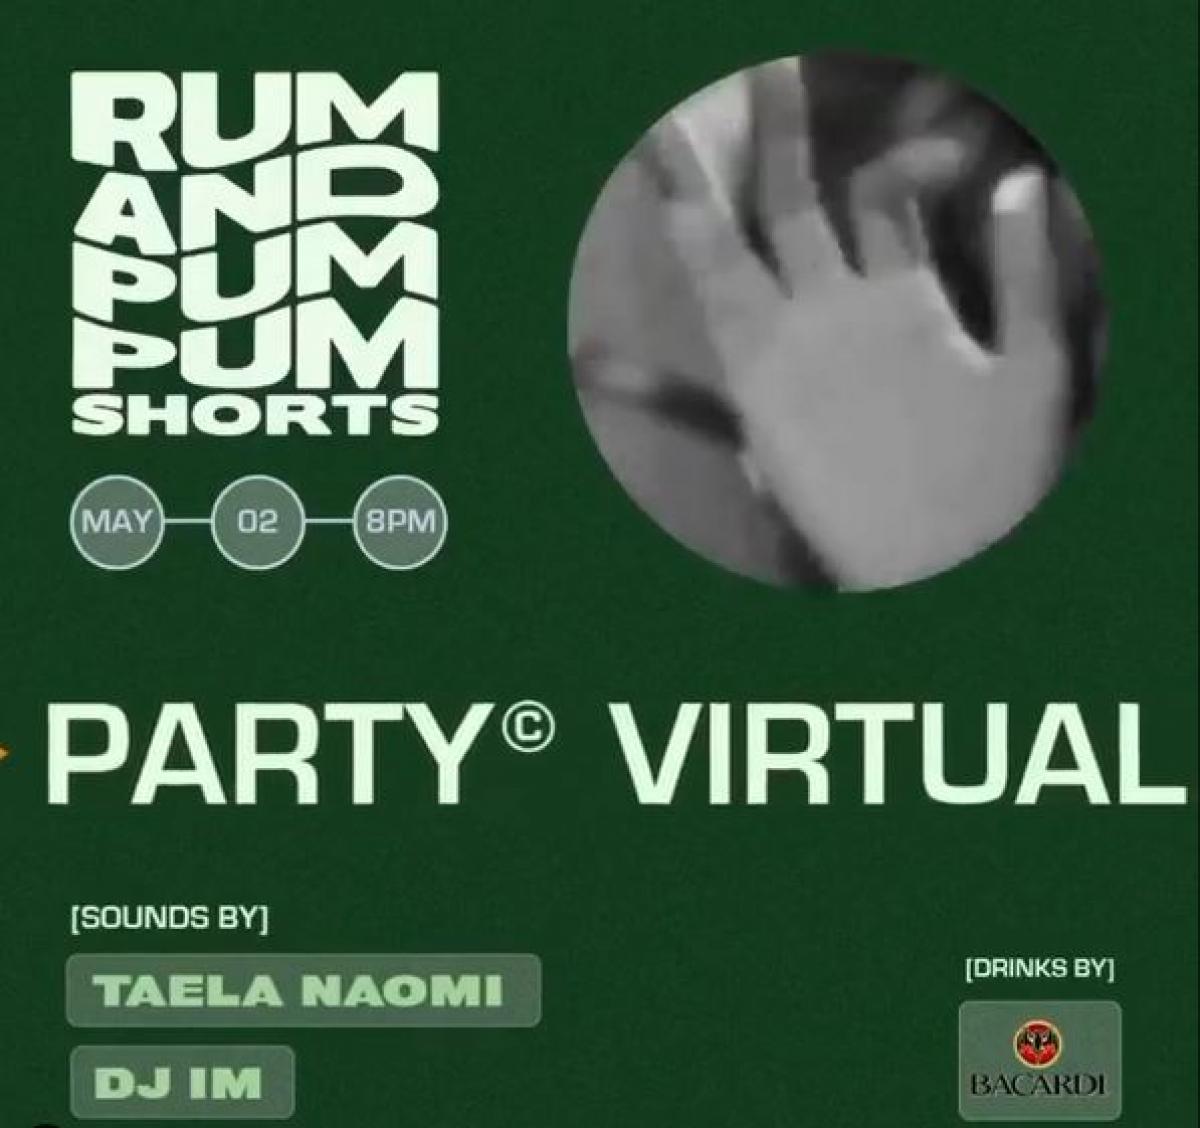 Rum And Pum Pum Short Virtual Party flyer or graphic.